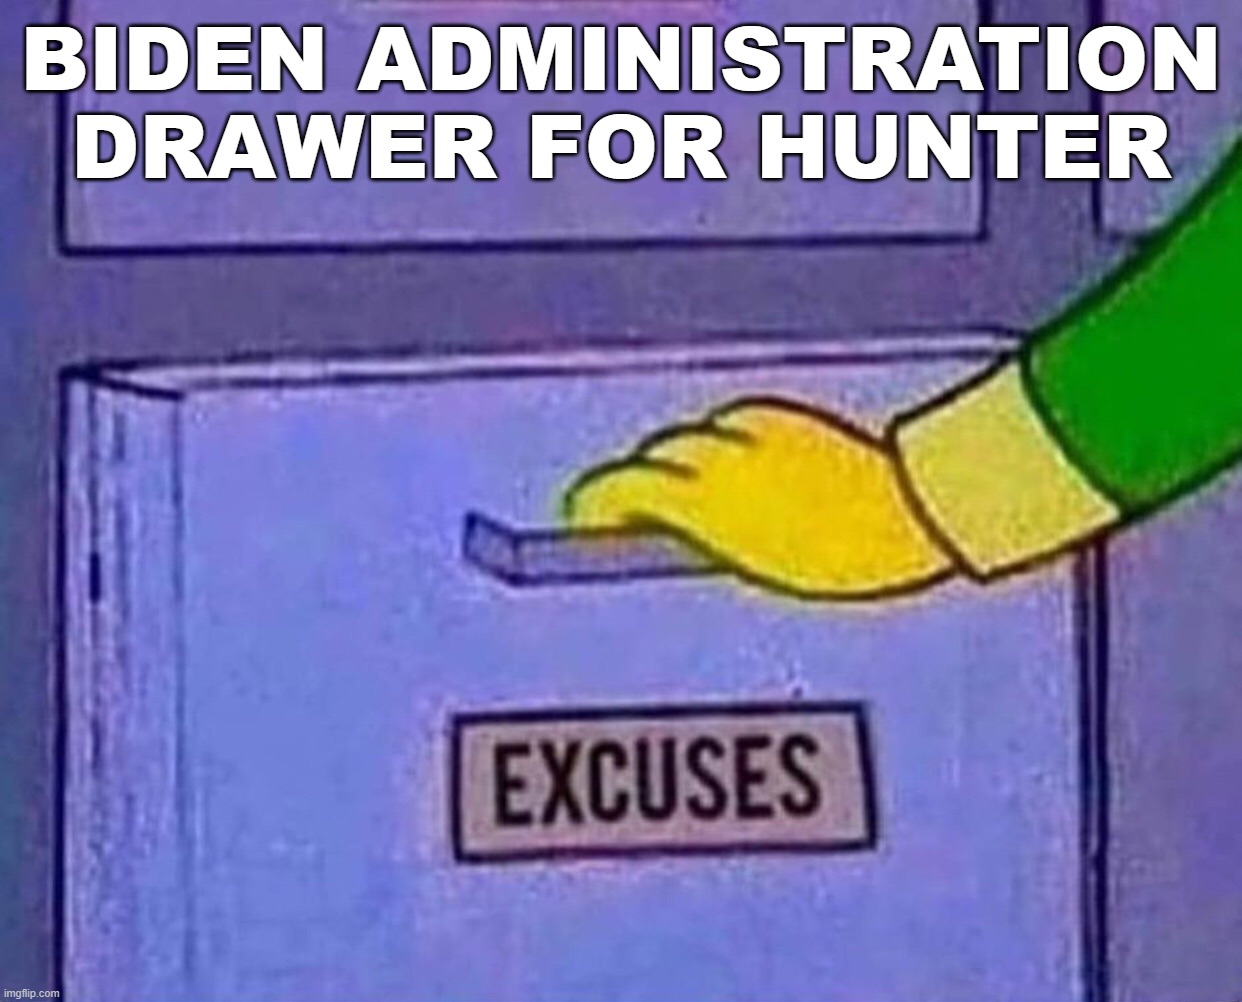 excuses | BIDEN ADMINISTRATION DRAWER FOR HUNTER | image tagged in excuses | made w/ Imgflip meme maker